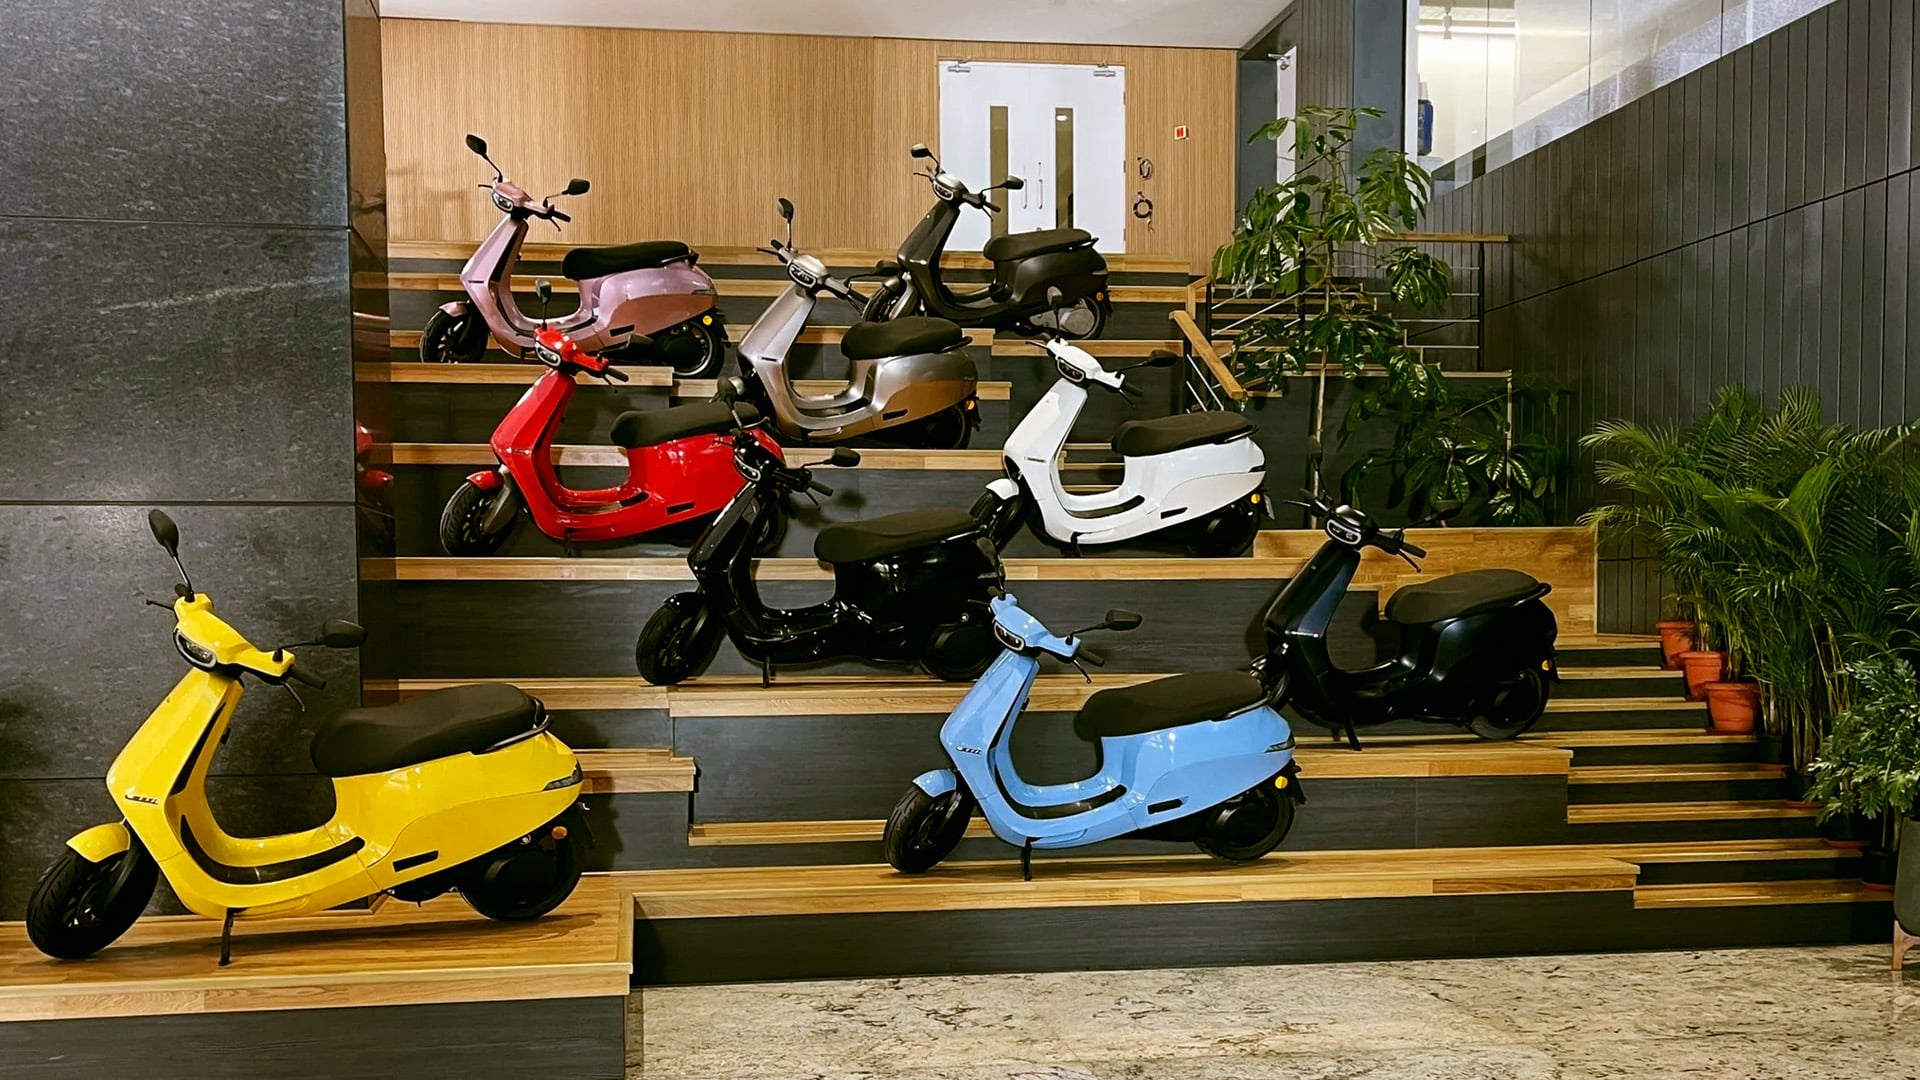 Ola Electric commences deliveries of S1 scooter